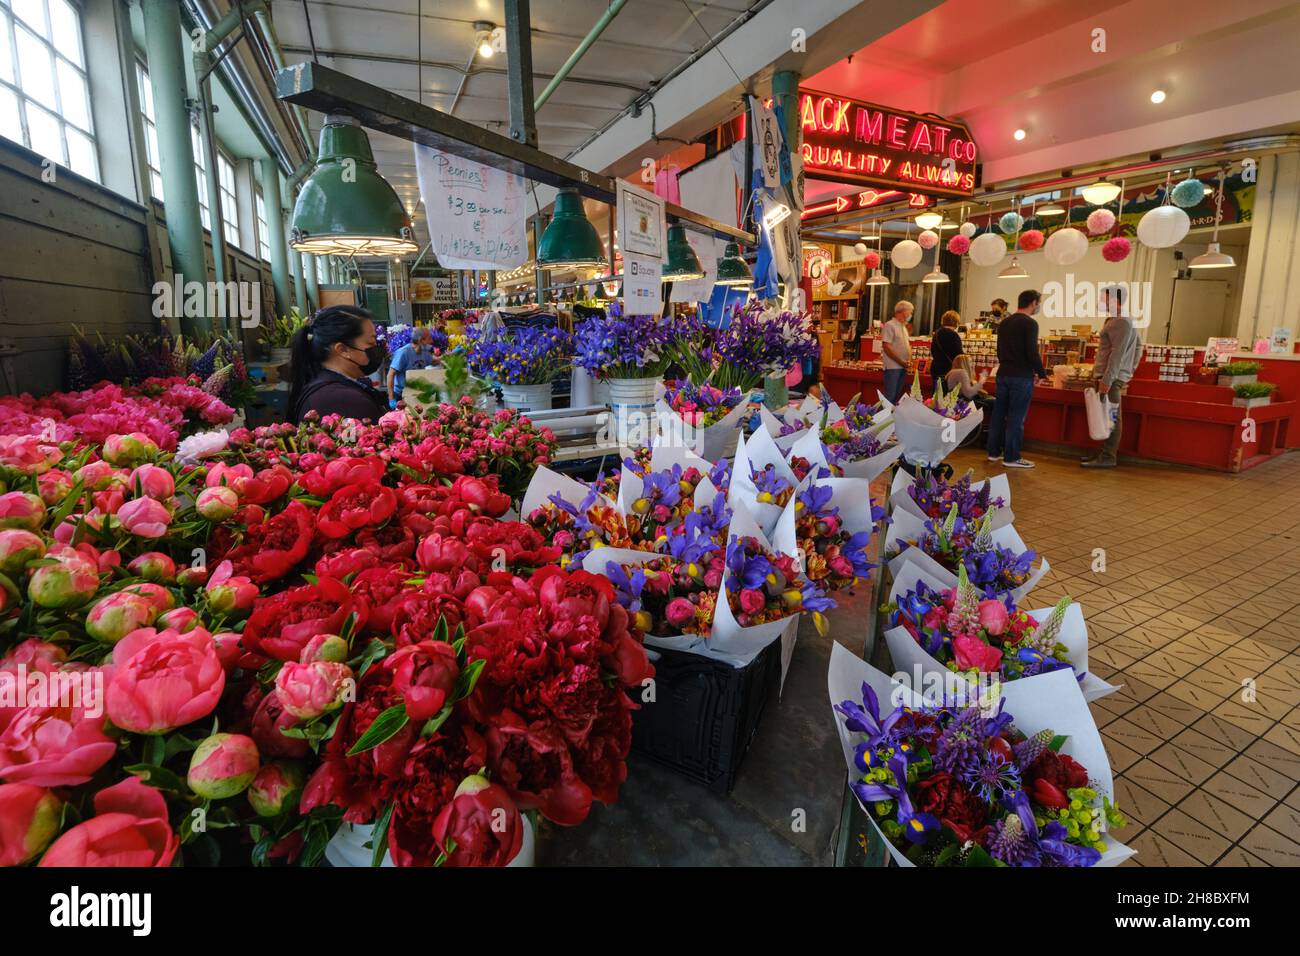 Flower stand in Pike place Public Market, Seattle, Washington Stock Photo